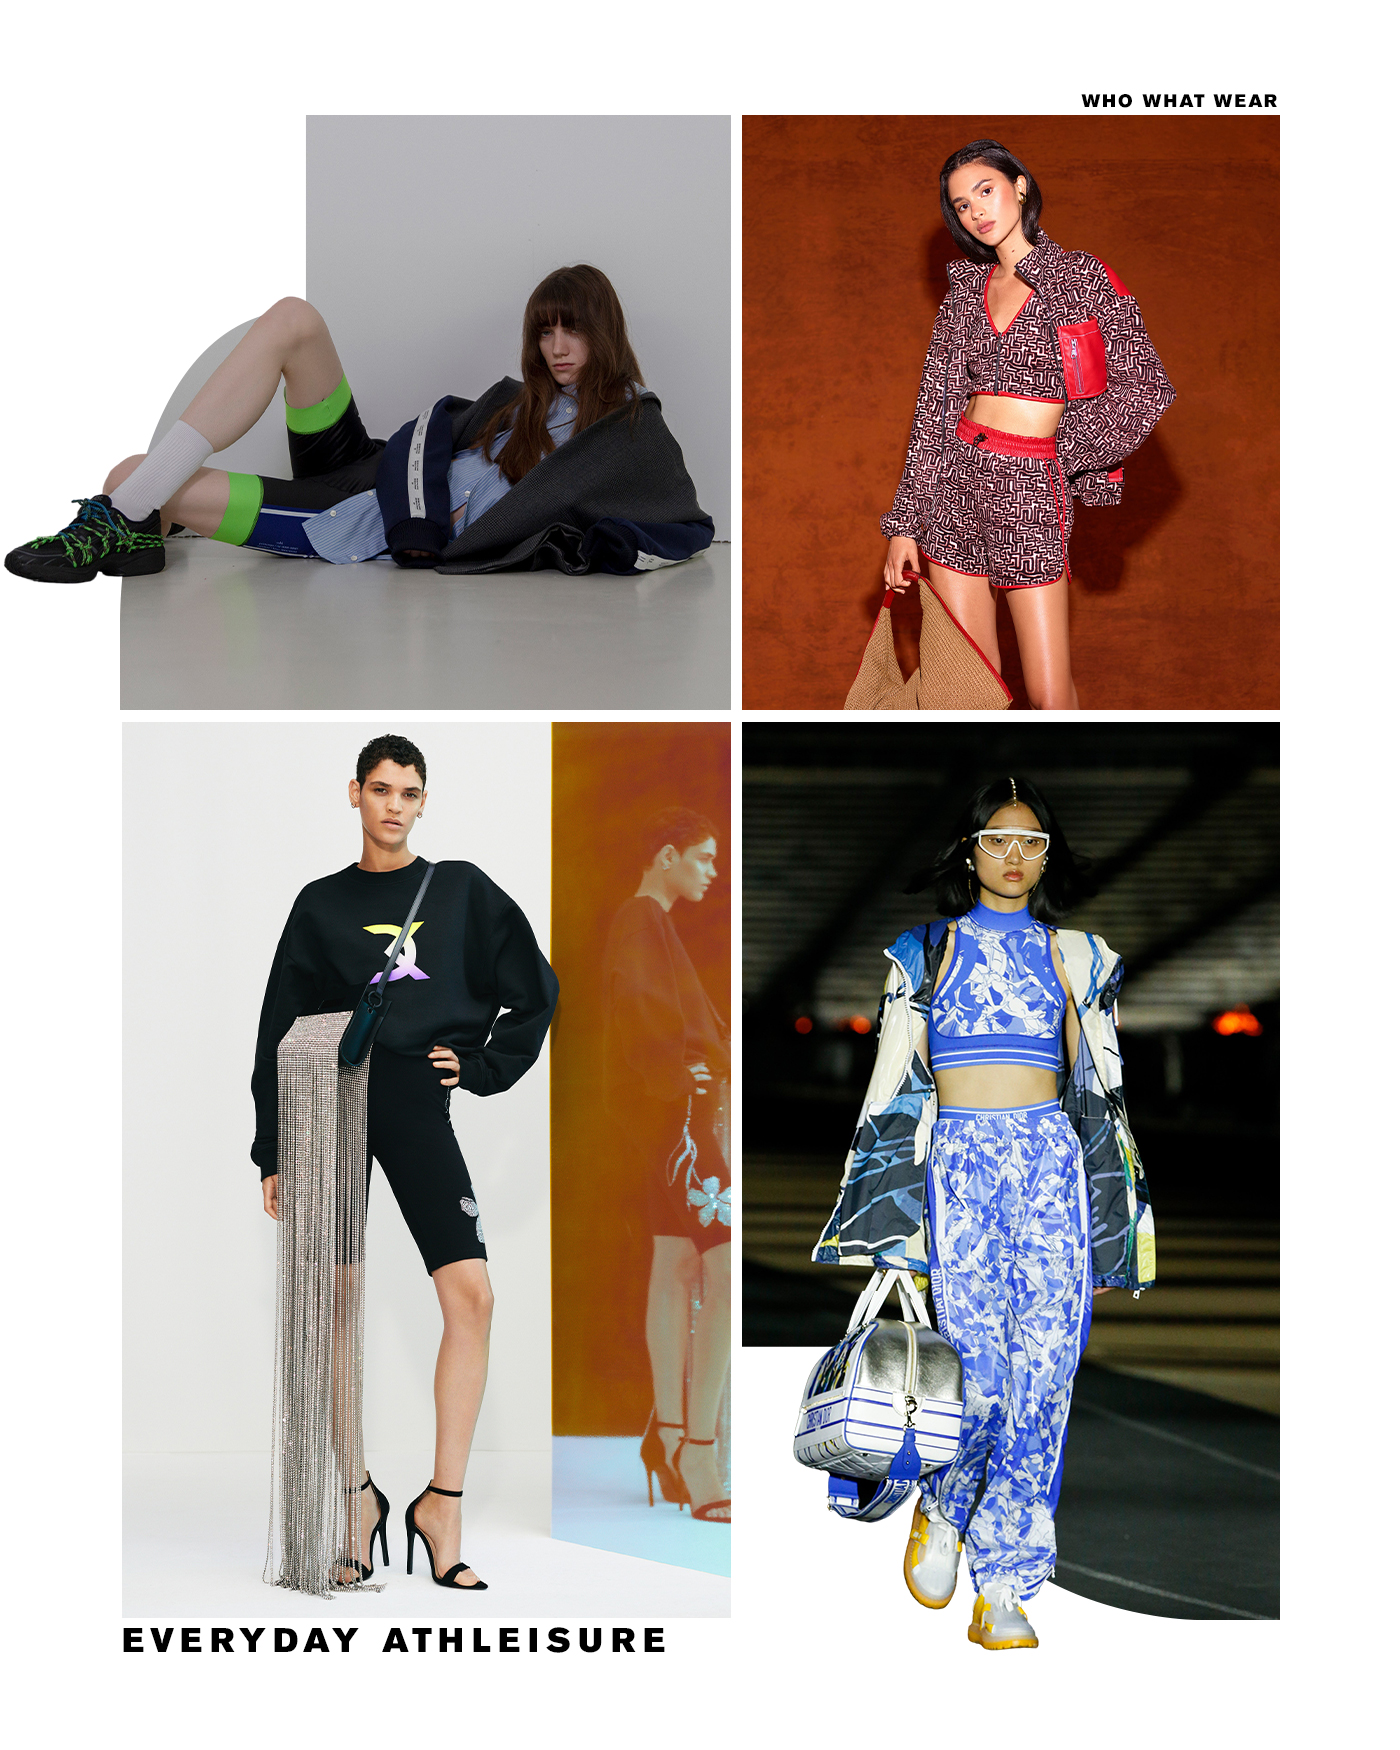 7 Key Fashion Trends That Will Dominate in 2022 | Who What Wear